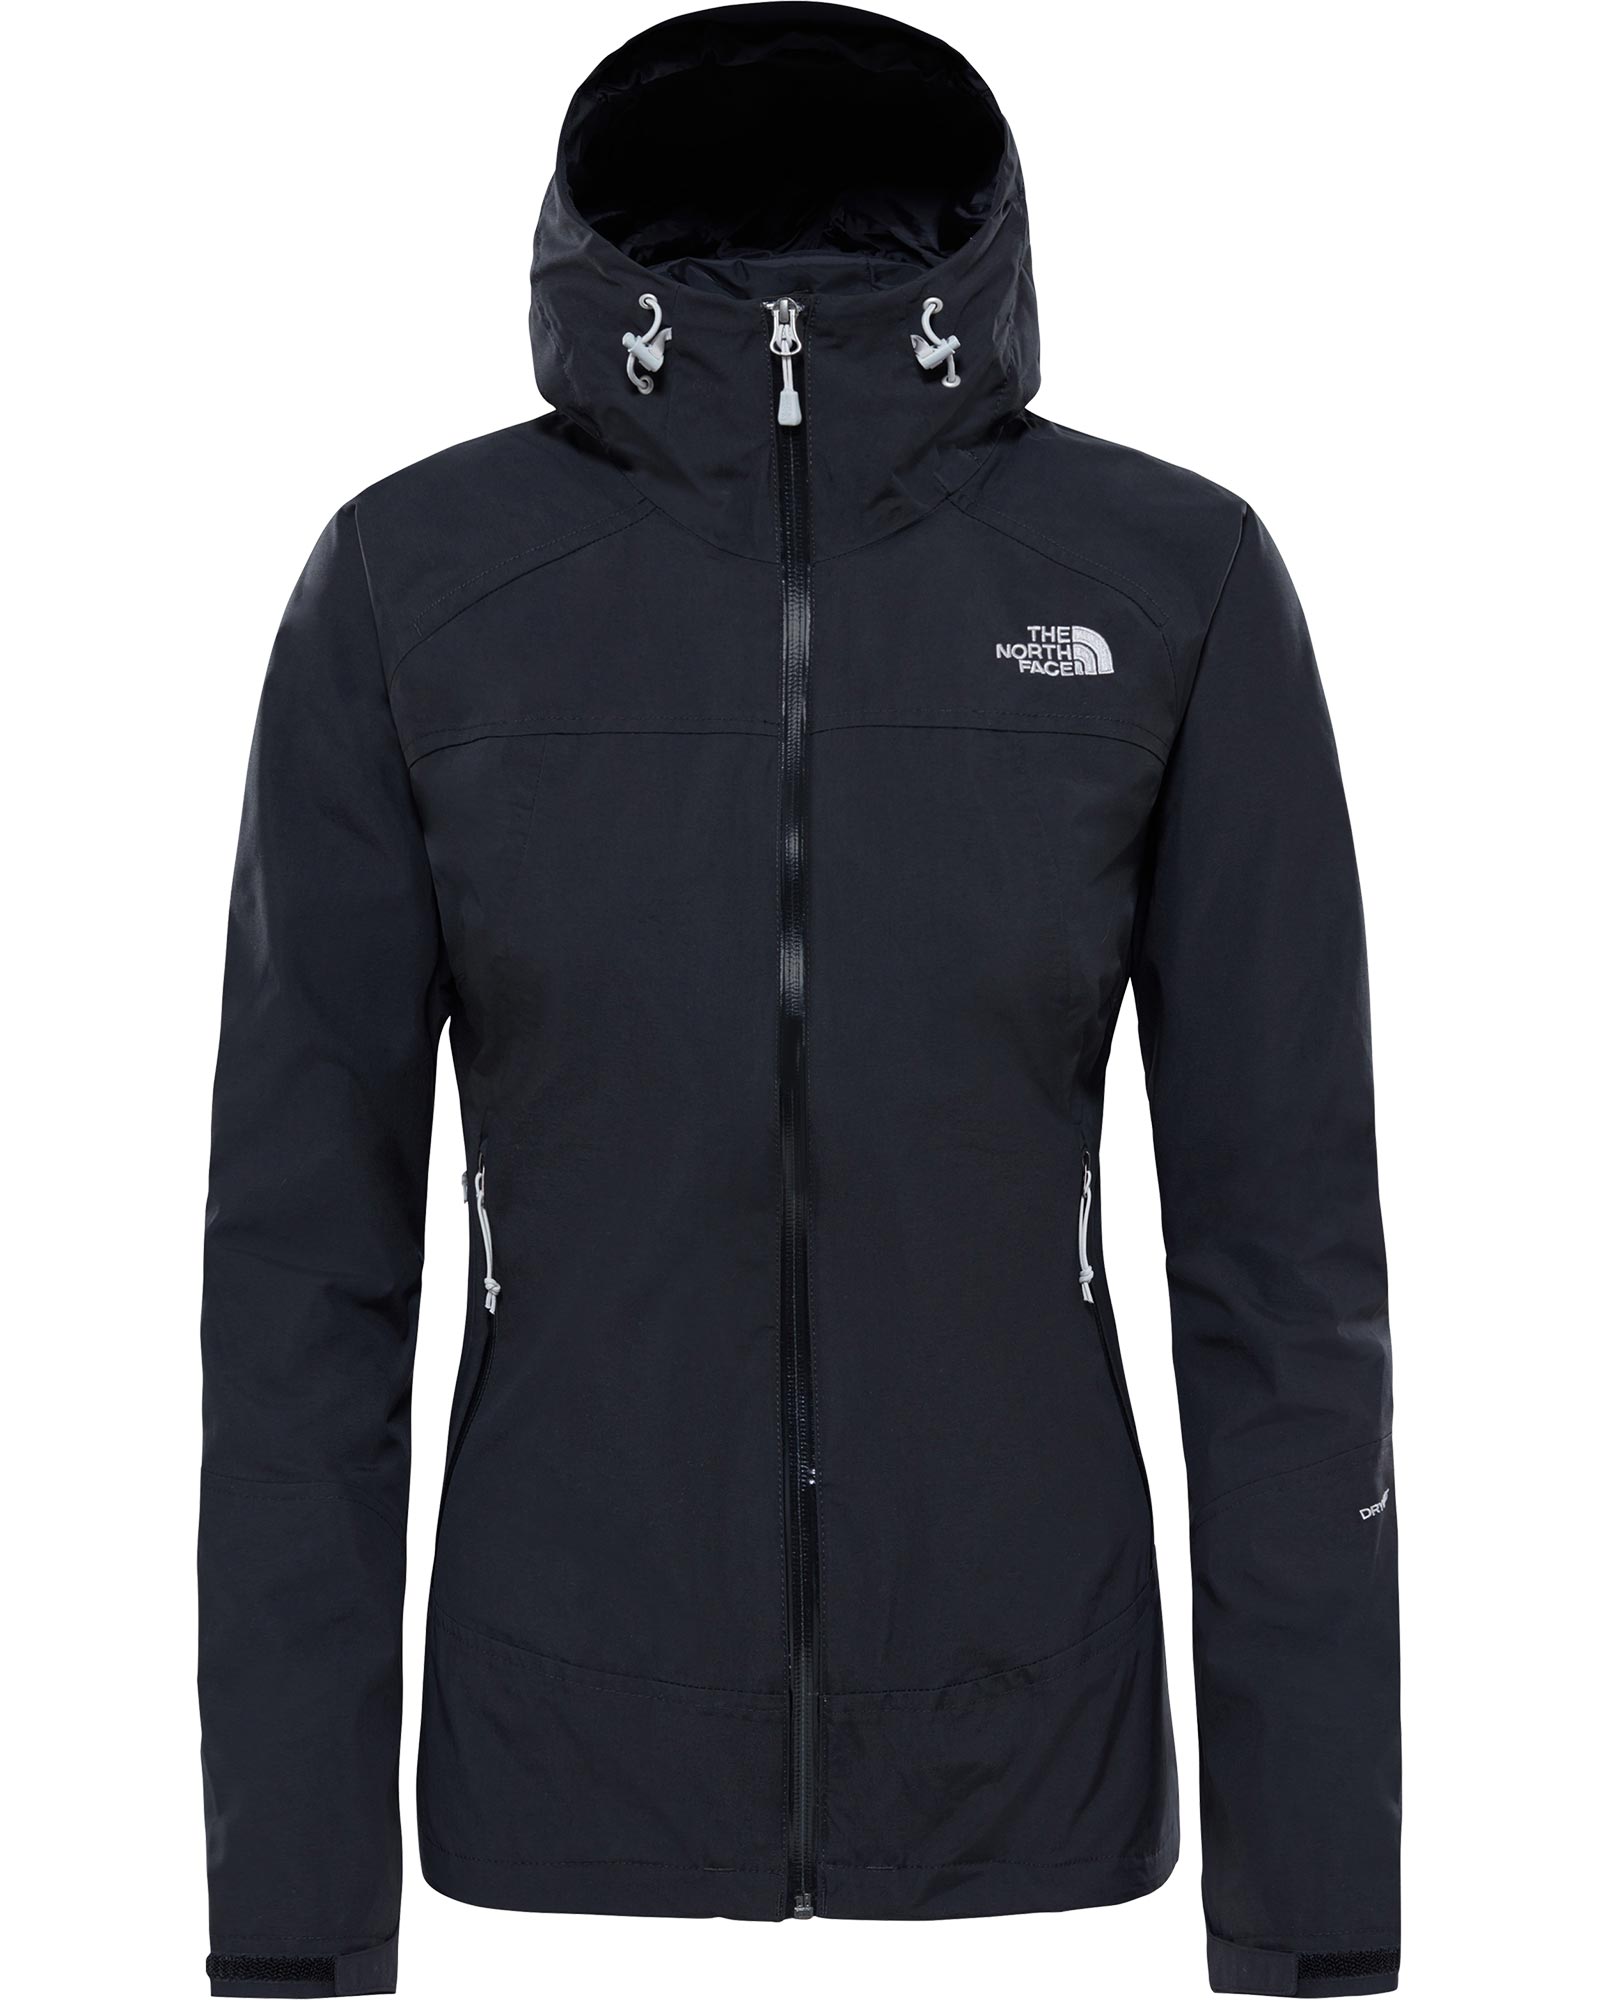 The North Face Stratos DryVent Women’s Jacket - TNF Black XS